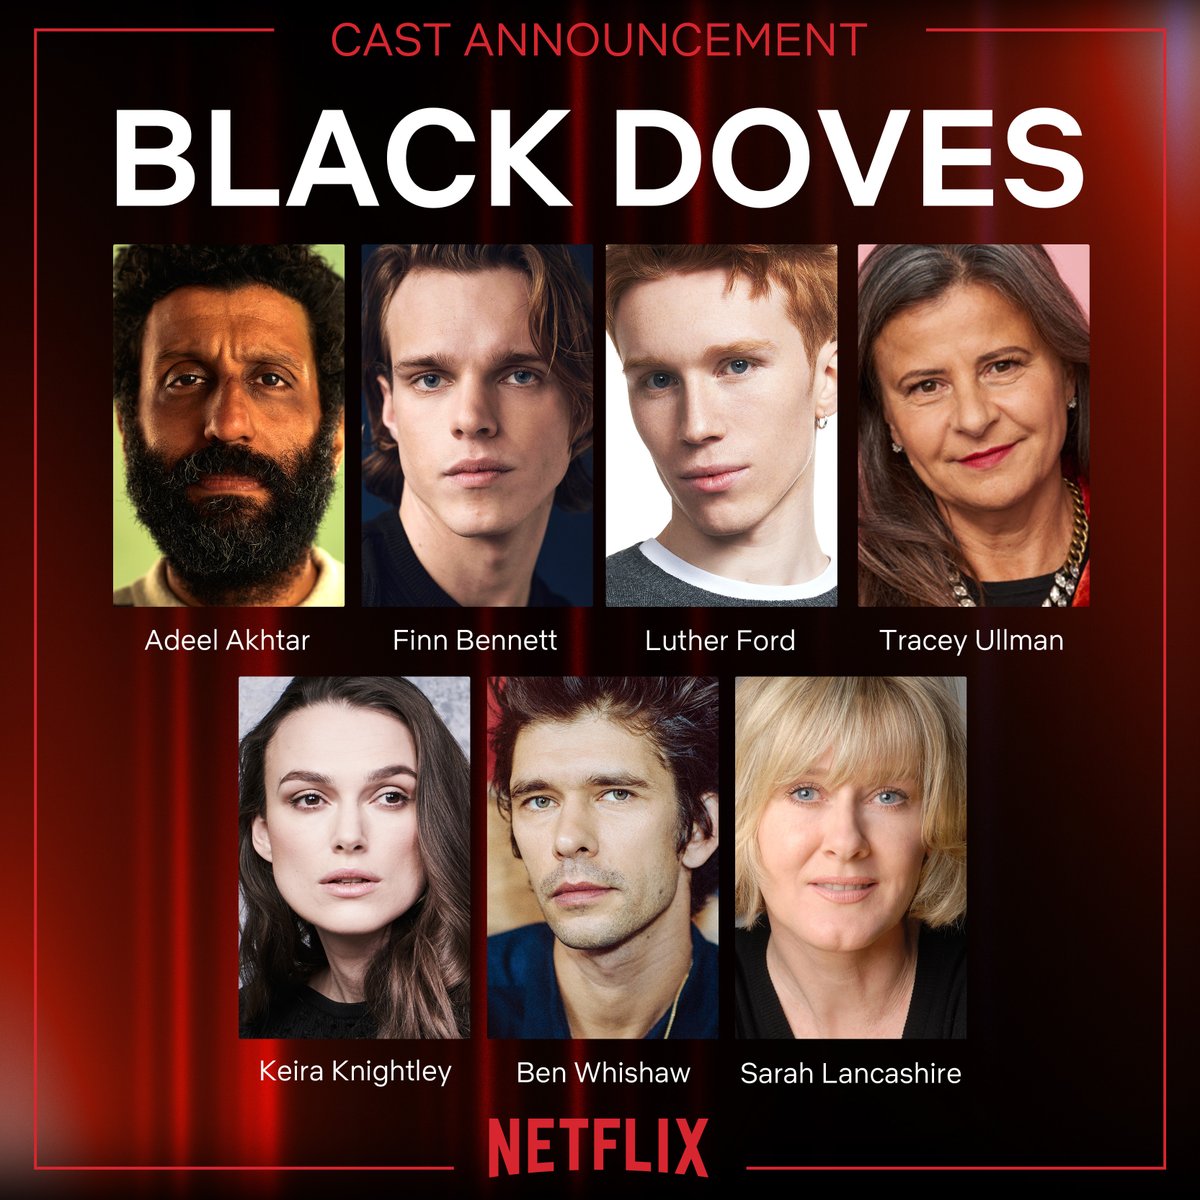 Adeel Akhtar, Finn Bennett, Luther Ford and Tracey Ullman join Keira Knightley, Ben Whishaw and Sarah Lancashire in Black Doves. The spy thriller comes to Netflix later this year. #NextOnNetflix